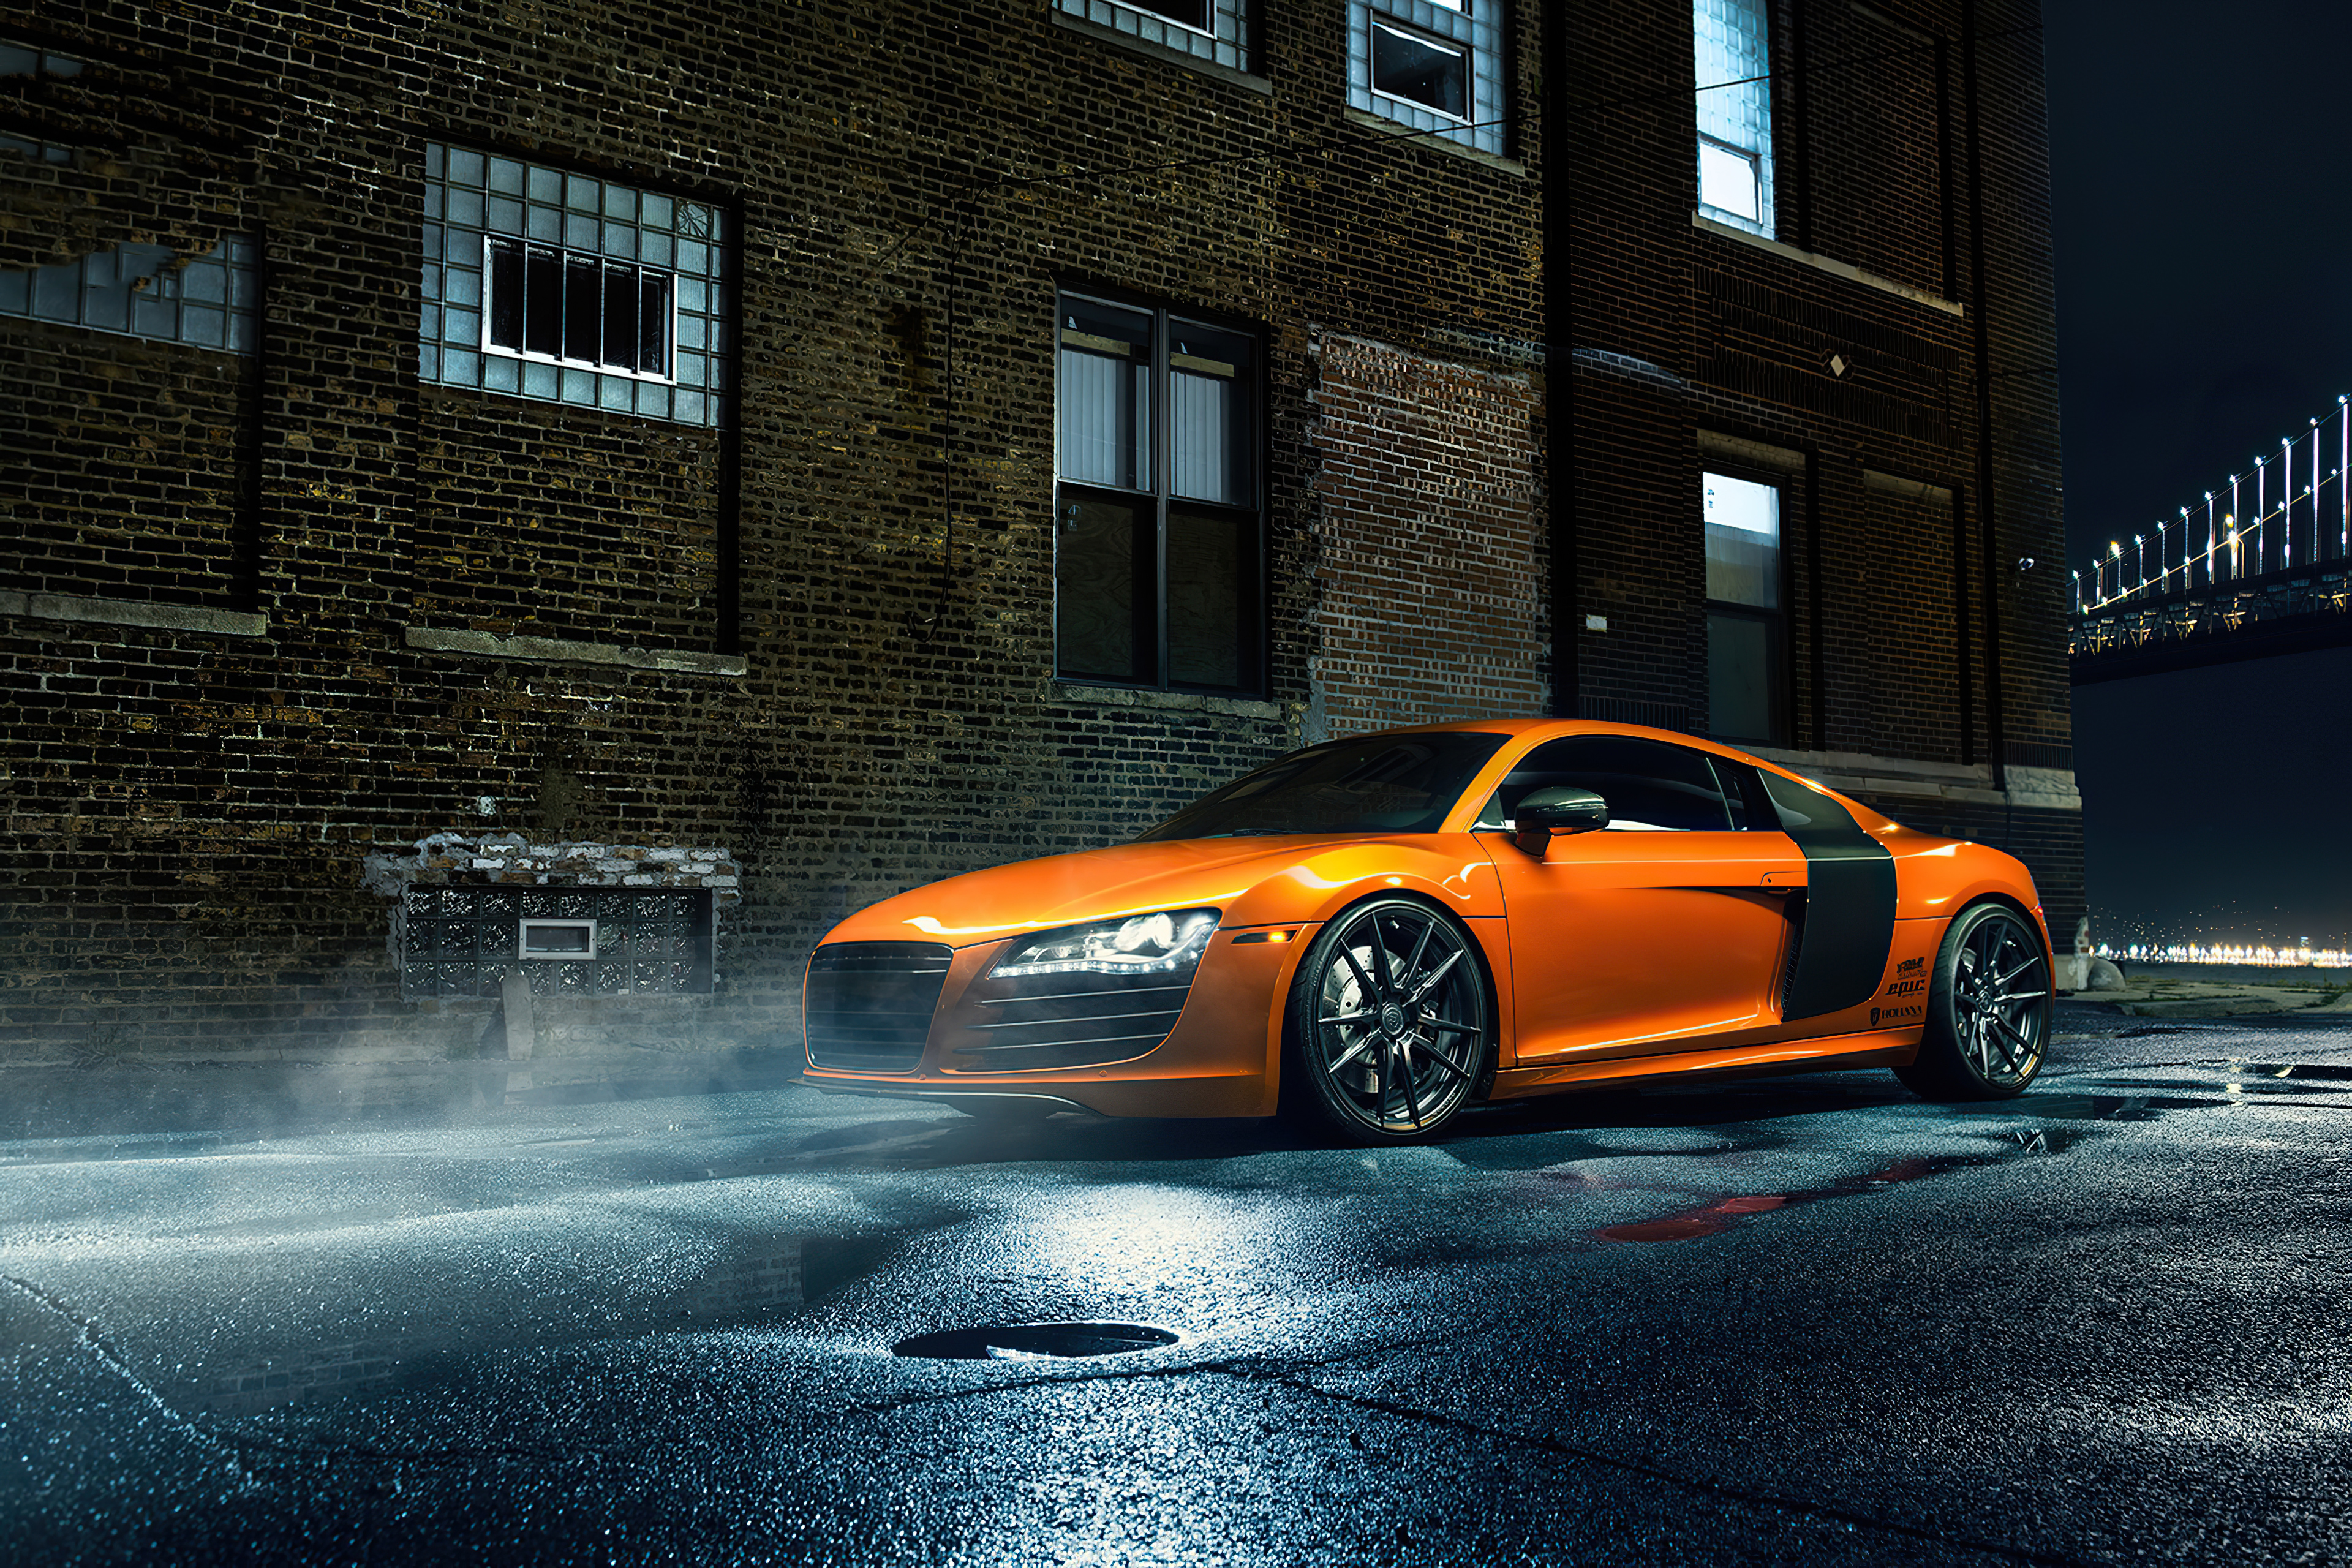 Free photo An orange Audi R8 stands on a wet night road.